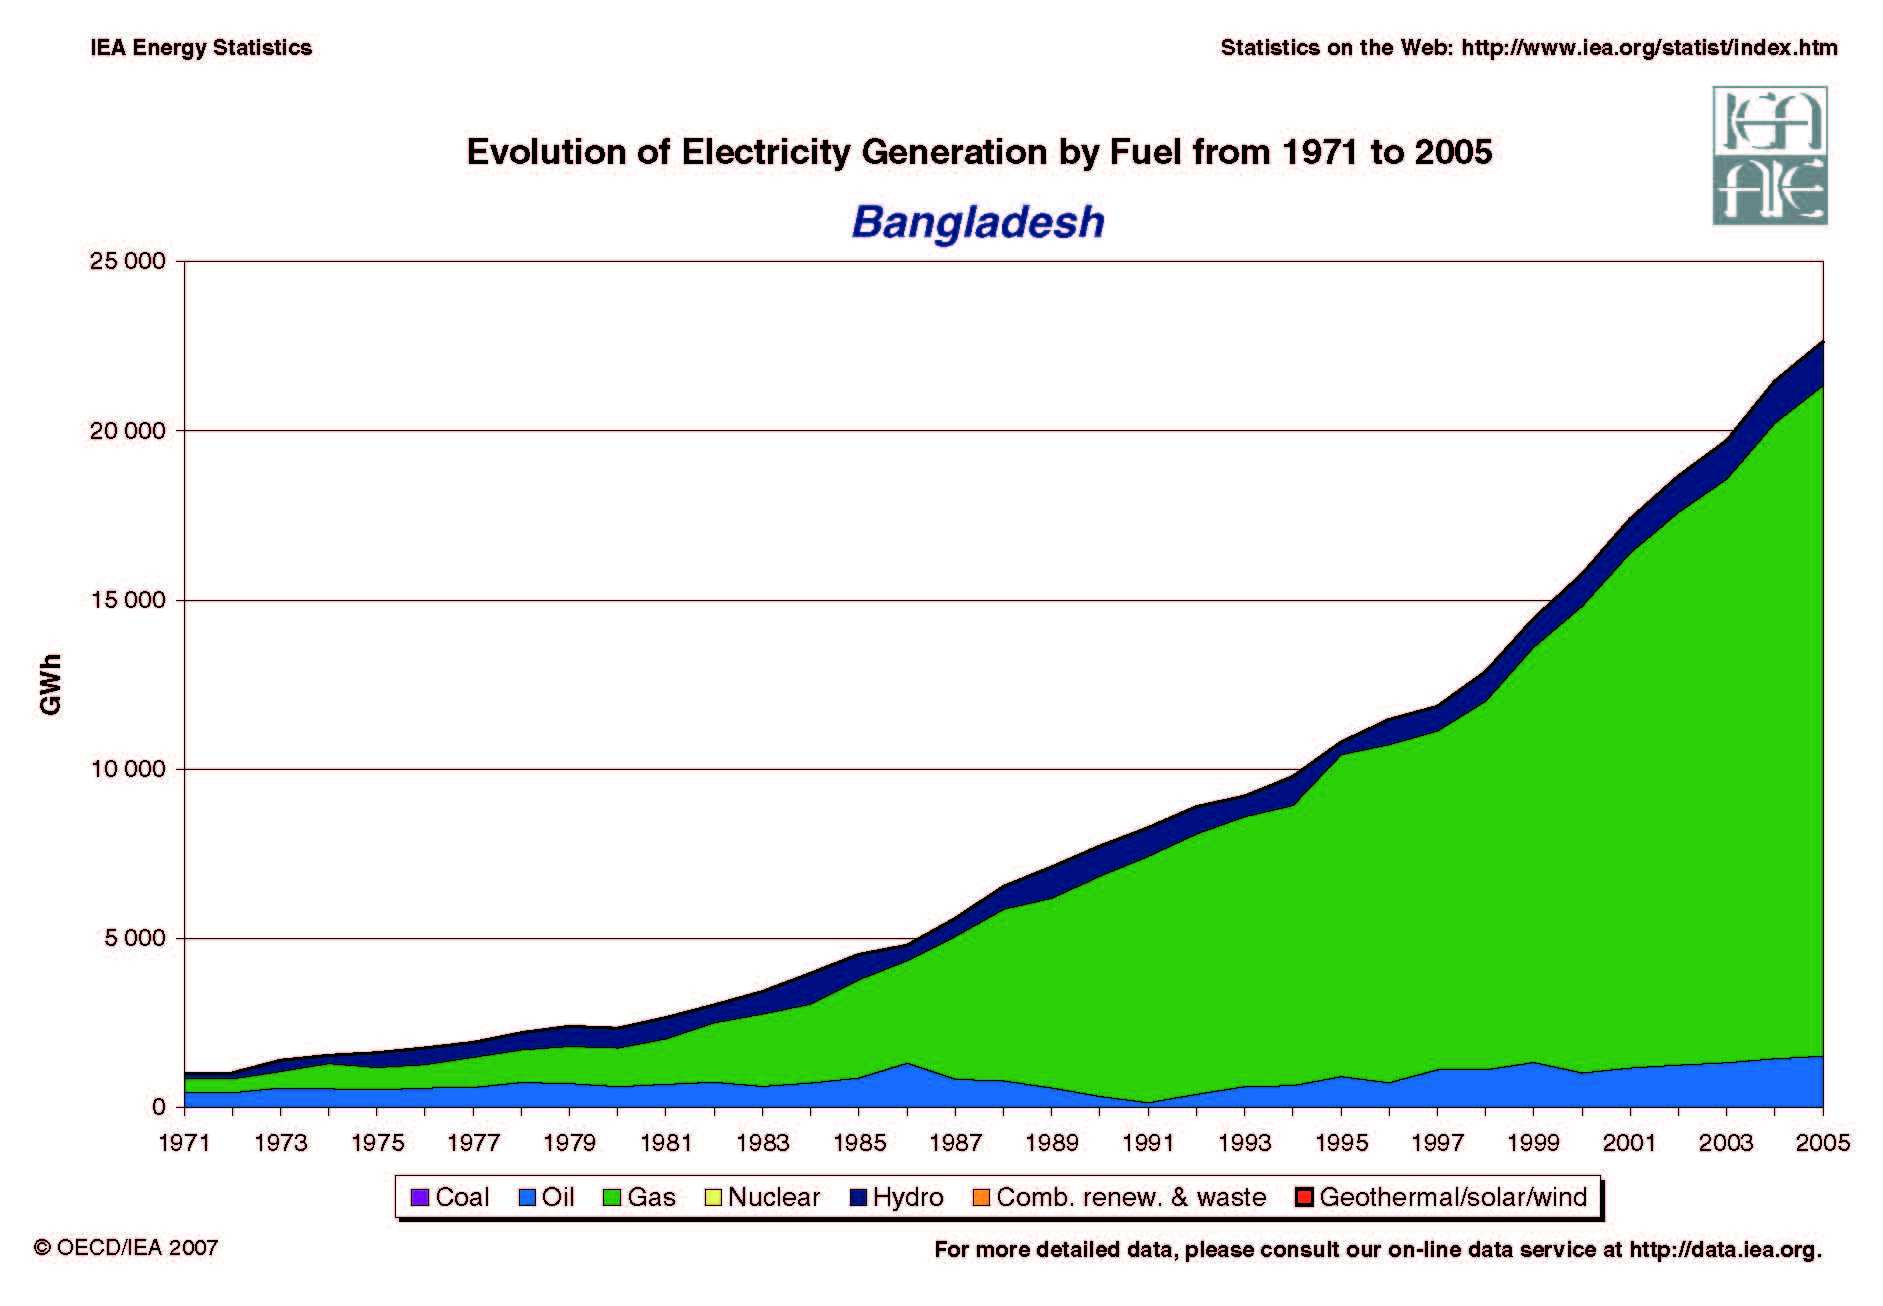 Electricity generation by fuel - Bangladesh